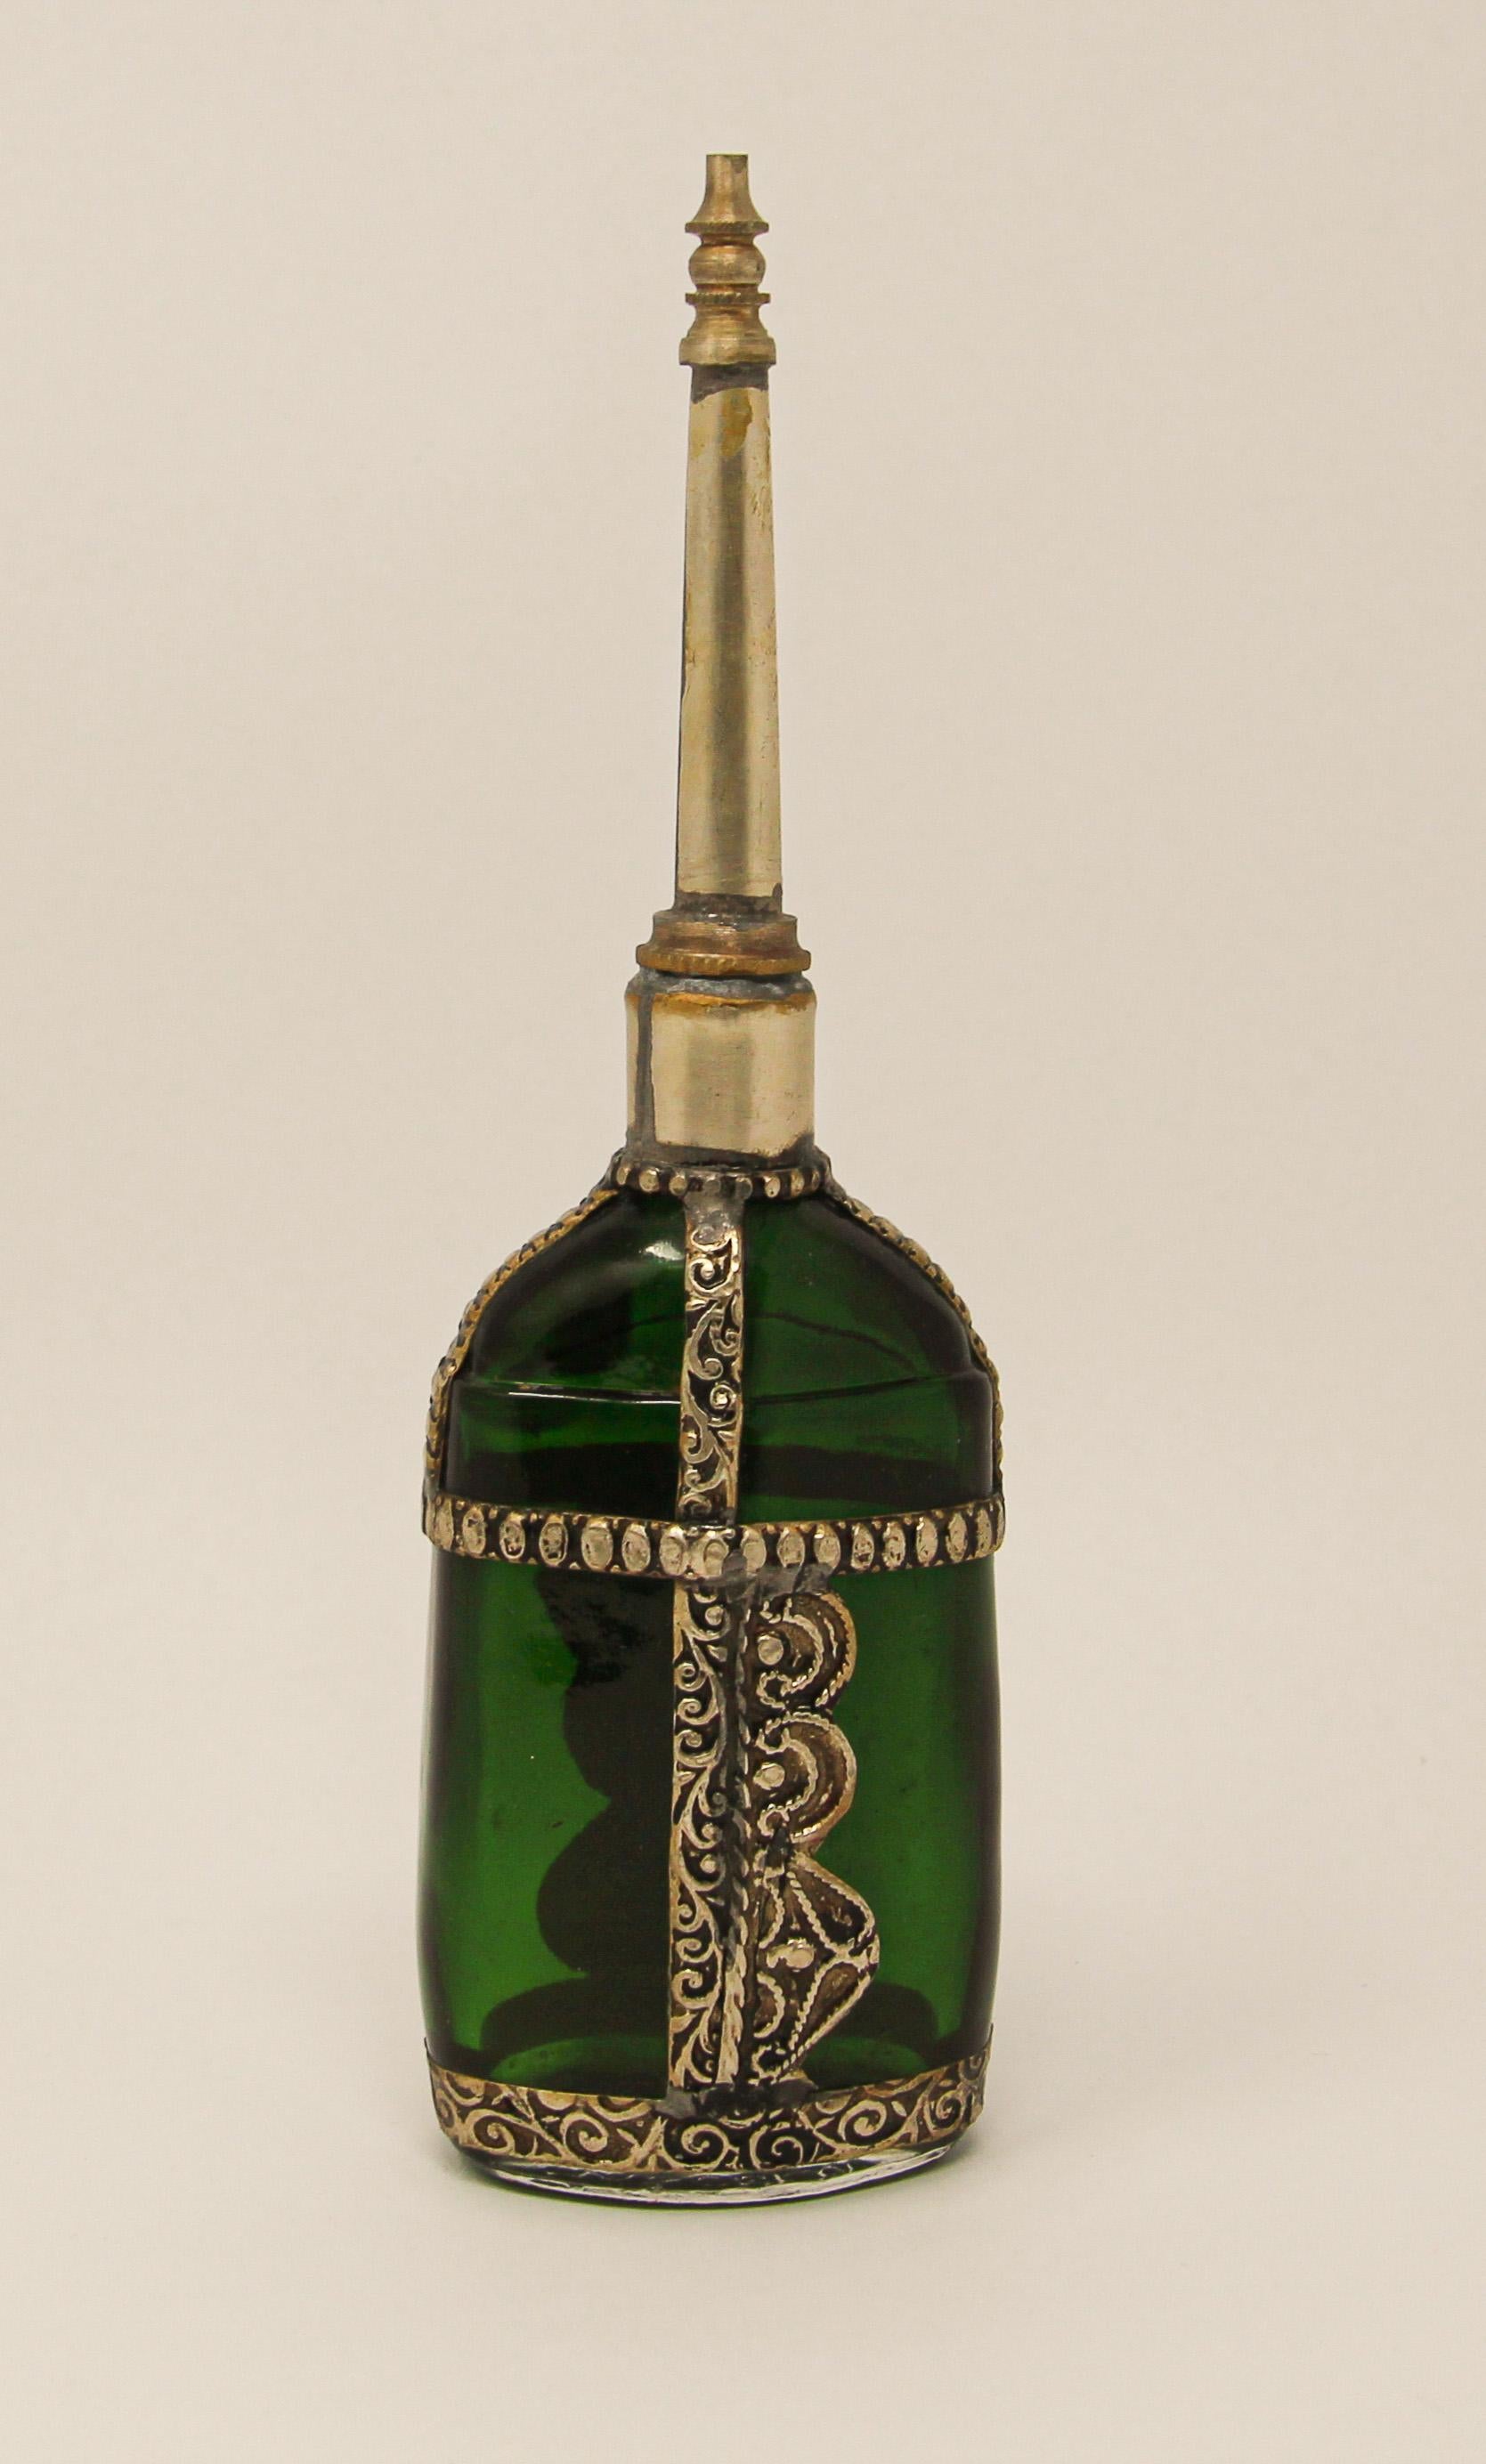 Handcrafted Moroccan Moorish green glass perfume bottle or rose water sprinkler with raised embossed silvered metal floral design over glass.
The pressed glass bottle in Art Deco, Art Nouveau style is oval shape with curved sides and hand decorated